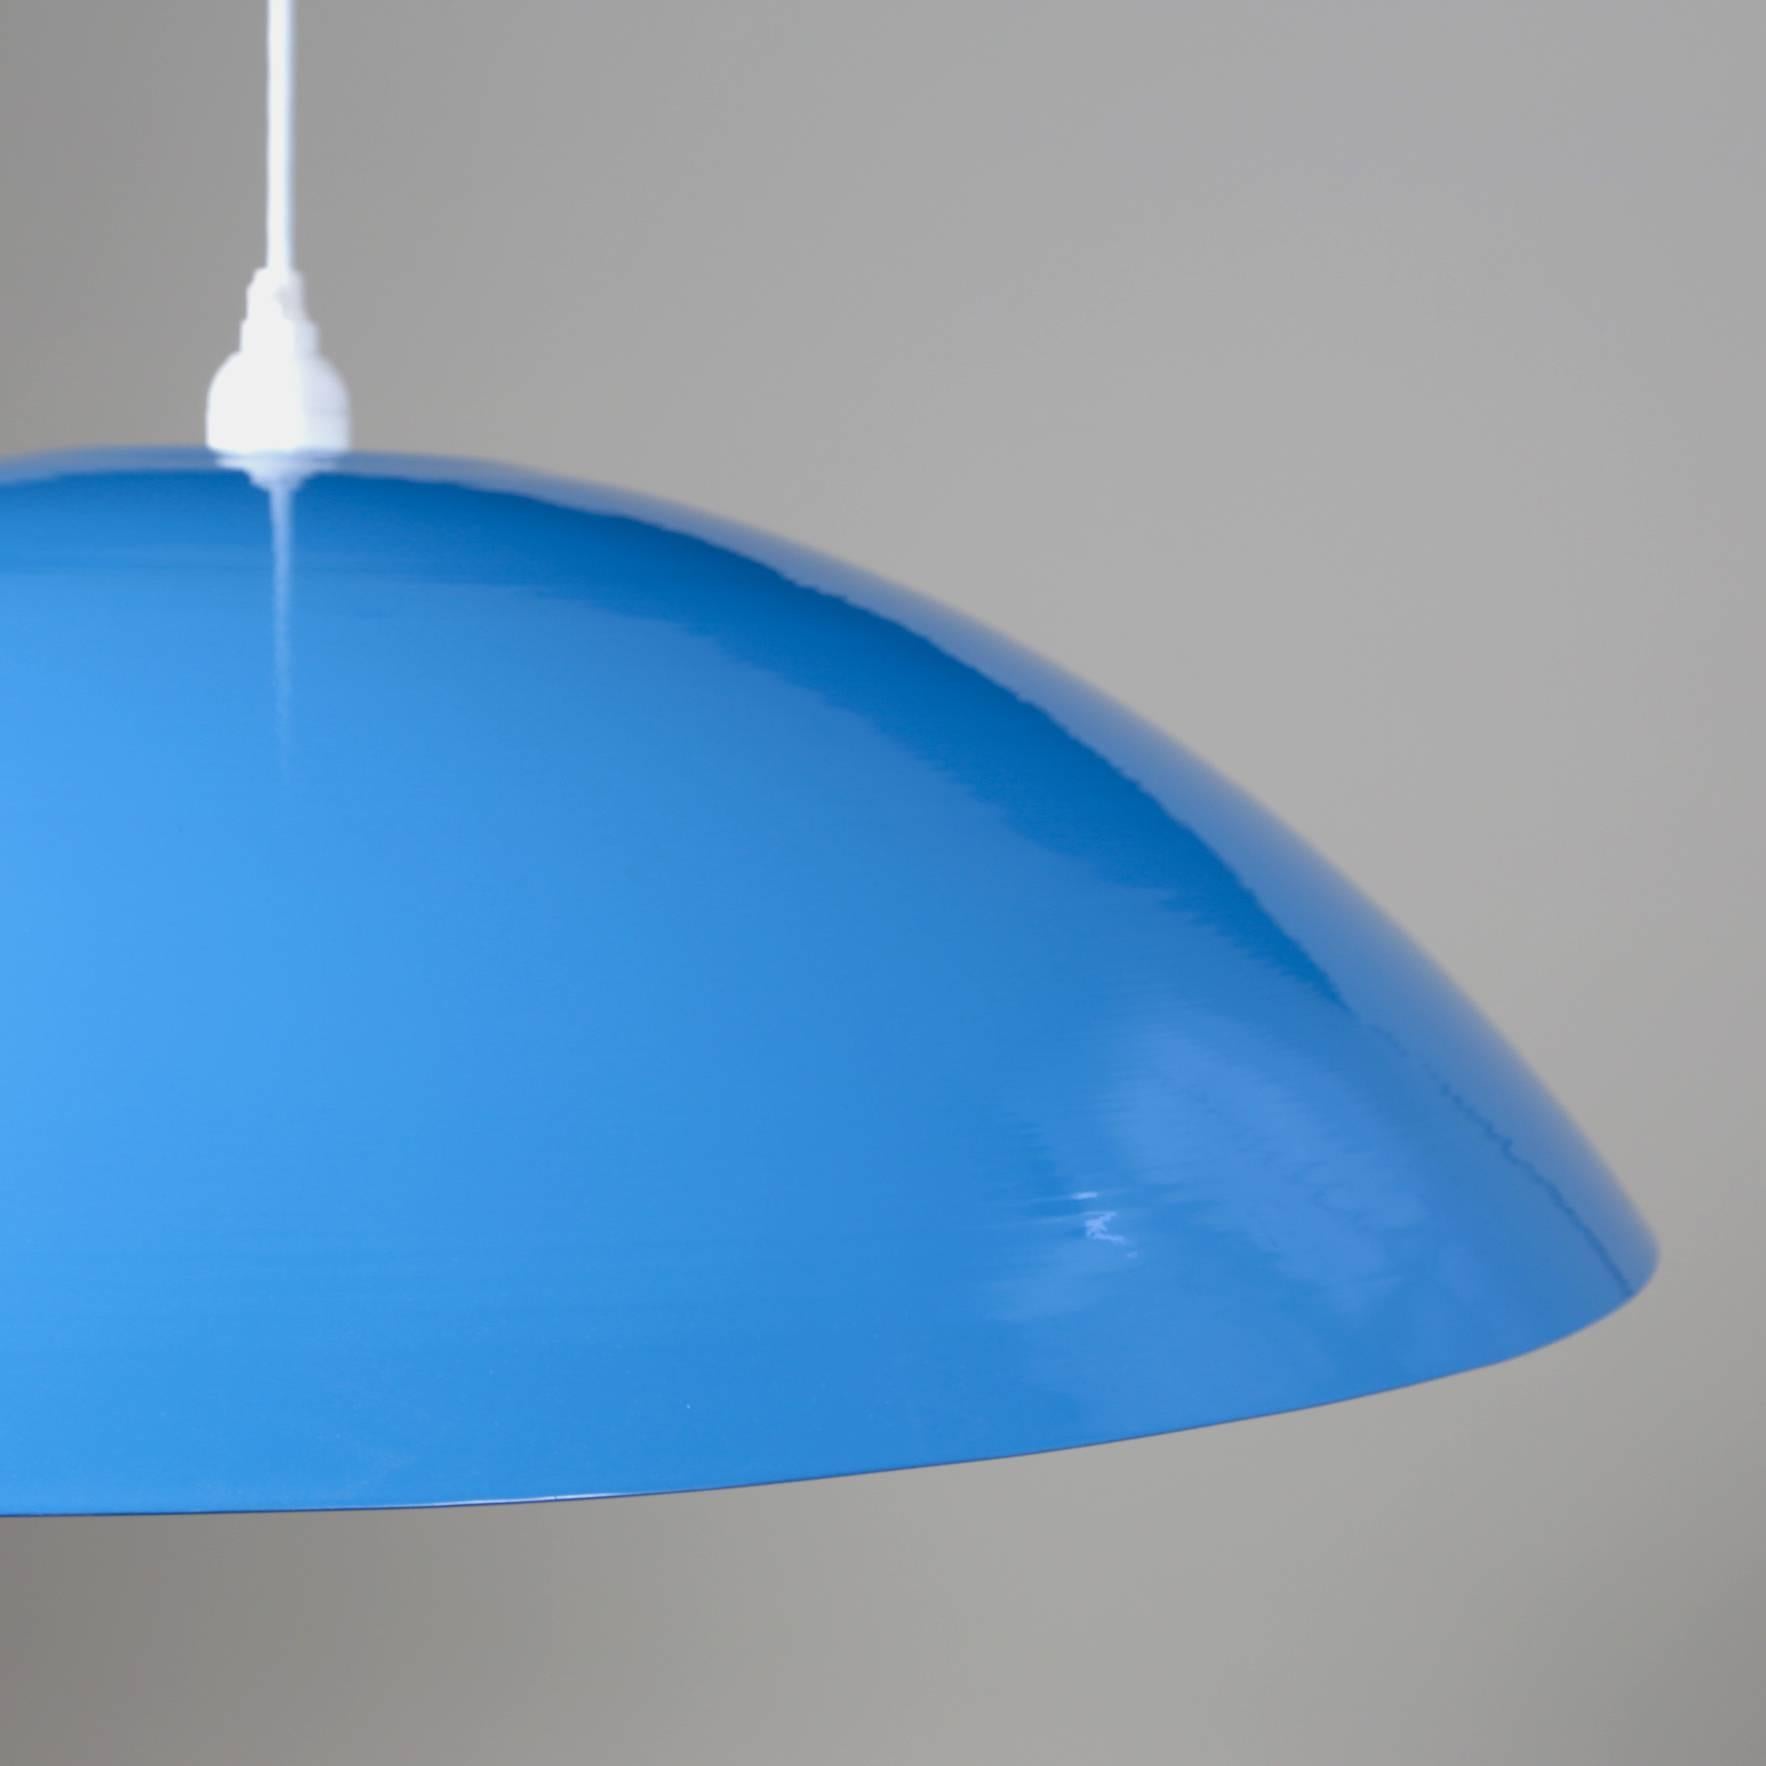 This listing is for a custom light fixture that Souda completed for a startup-company's office in NYC. Shown in this image shows the pendant with a light blue finish. It was a leftover from this custom project and was used in Souda's office so it